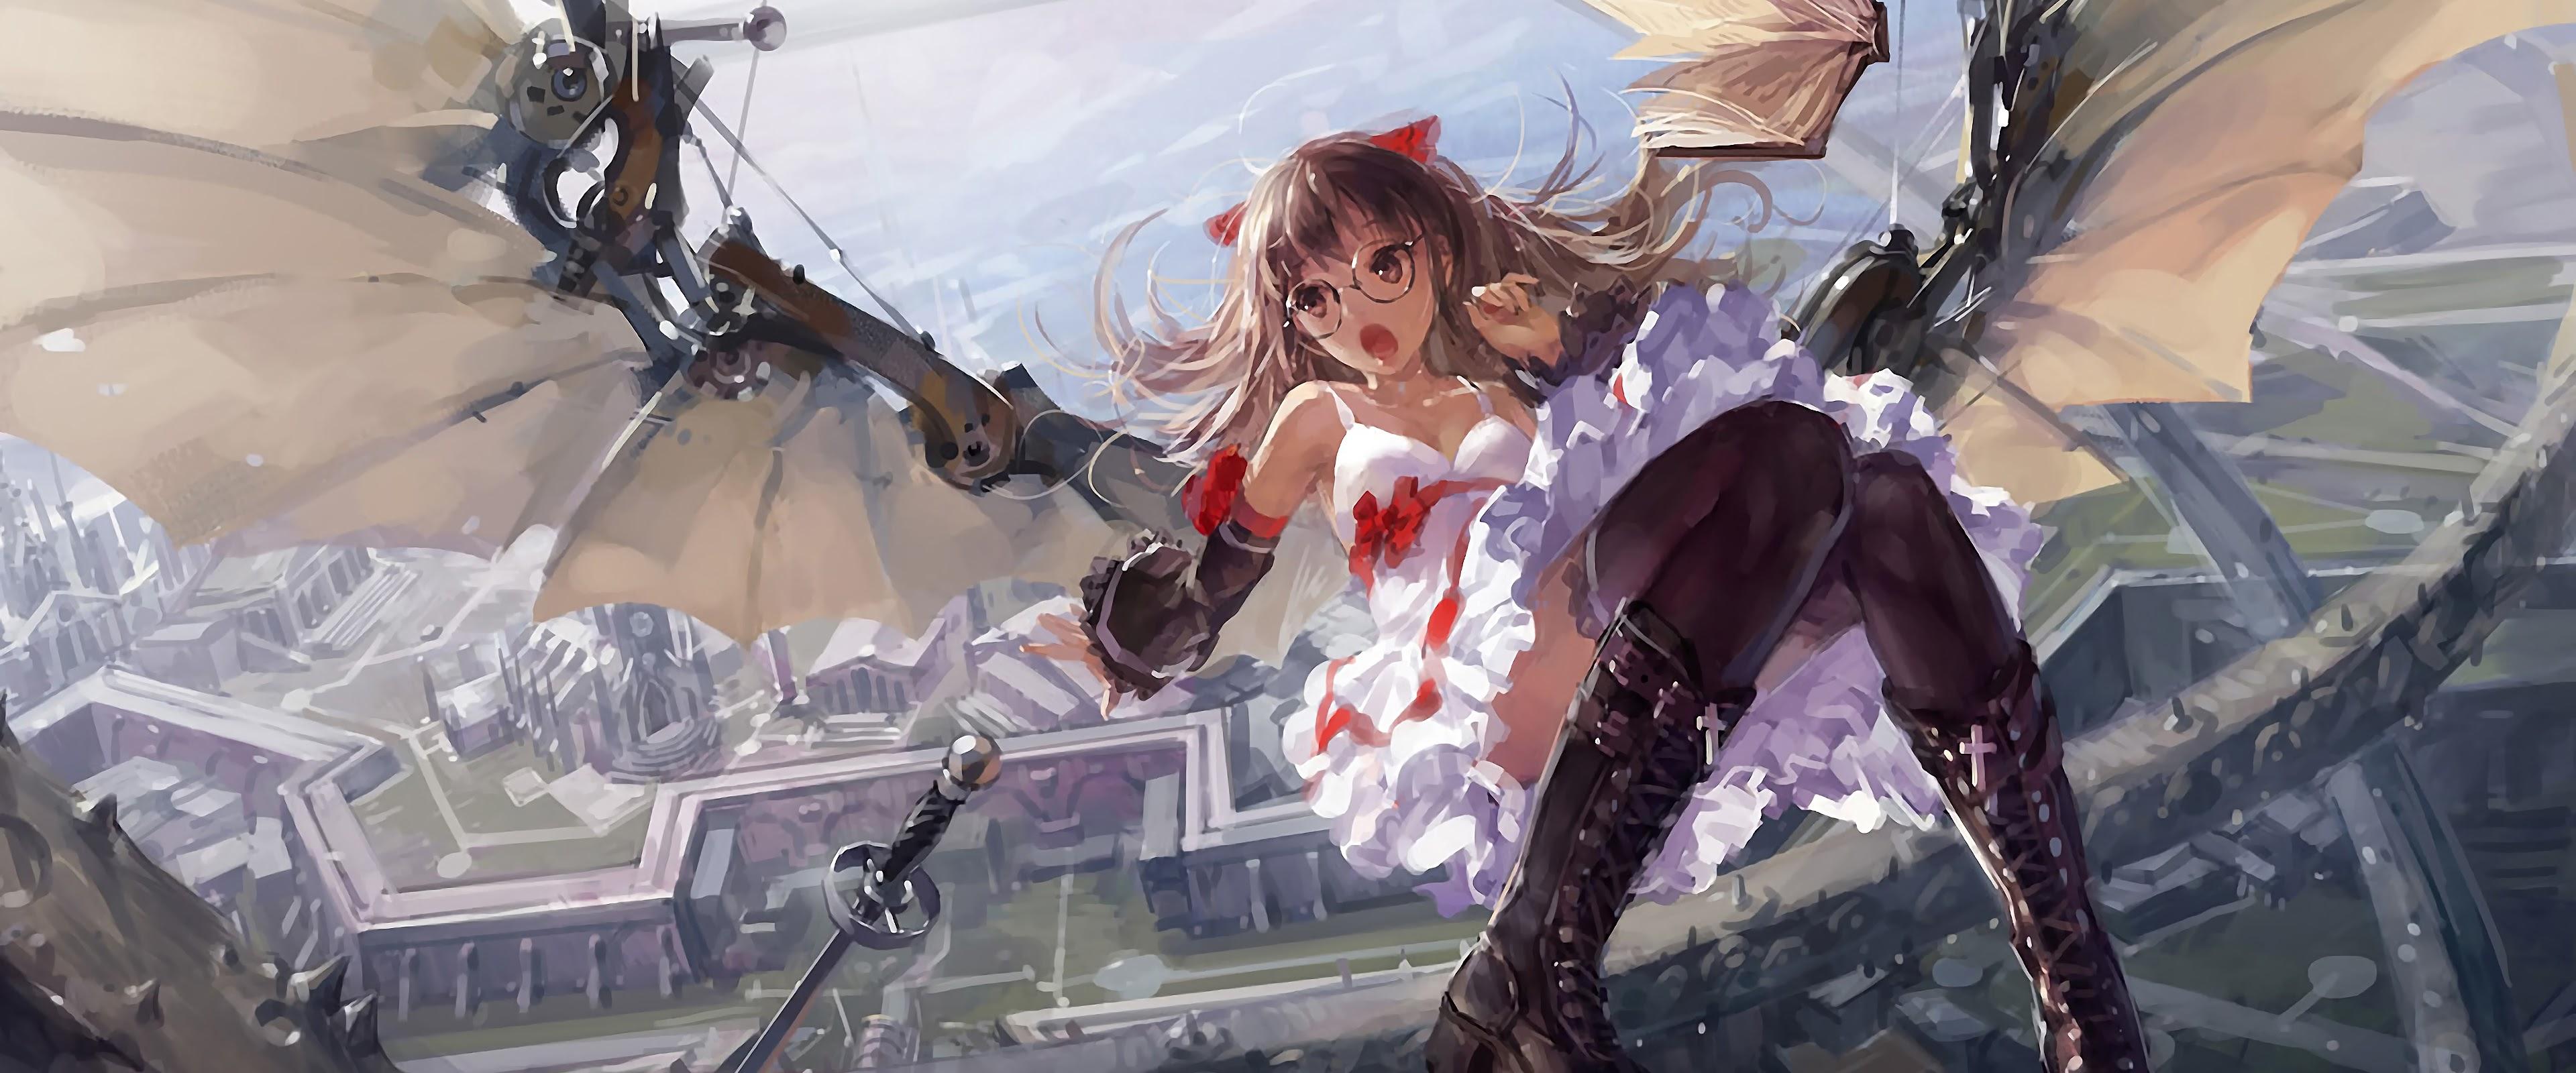 3840X1600 Anime Wallpapers - Top Free 3840X1600 Anime Backgrounds